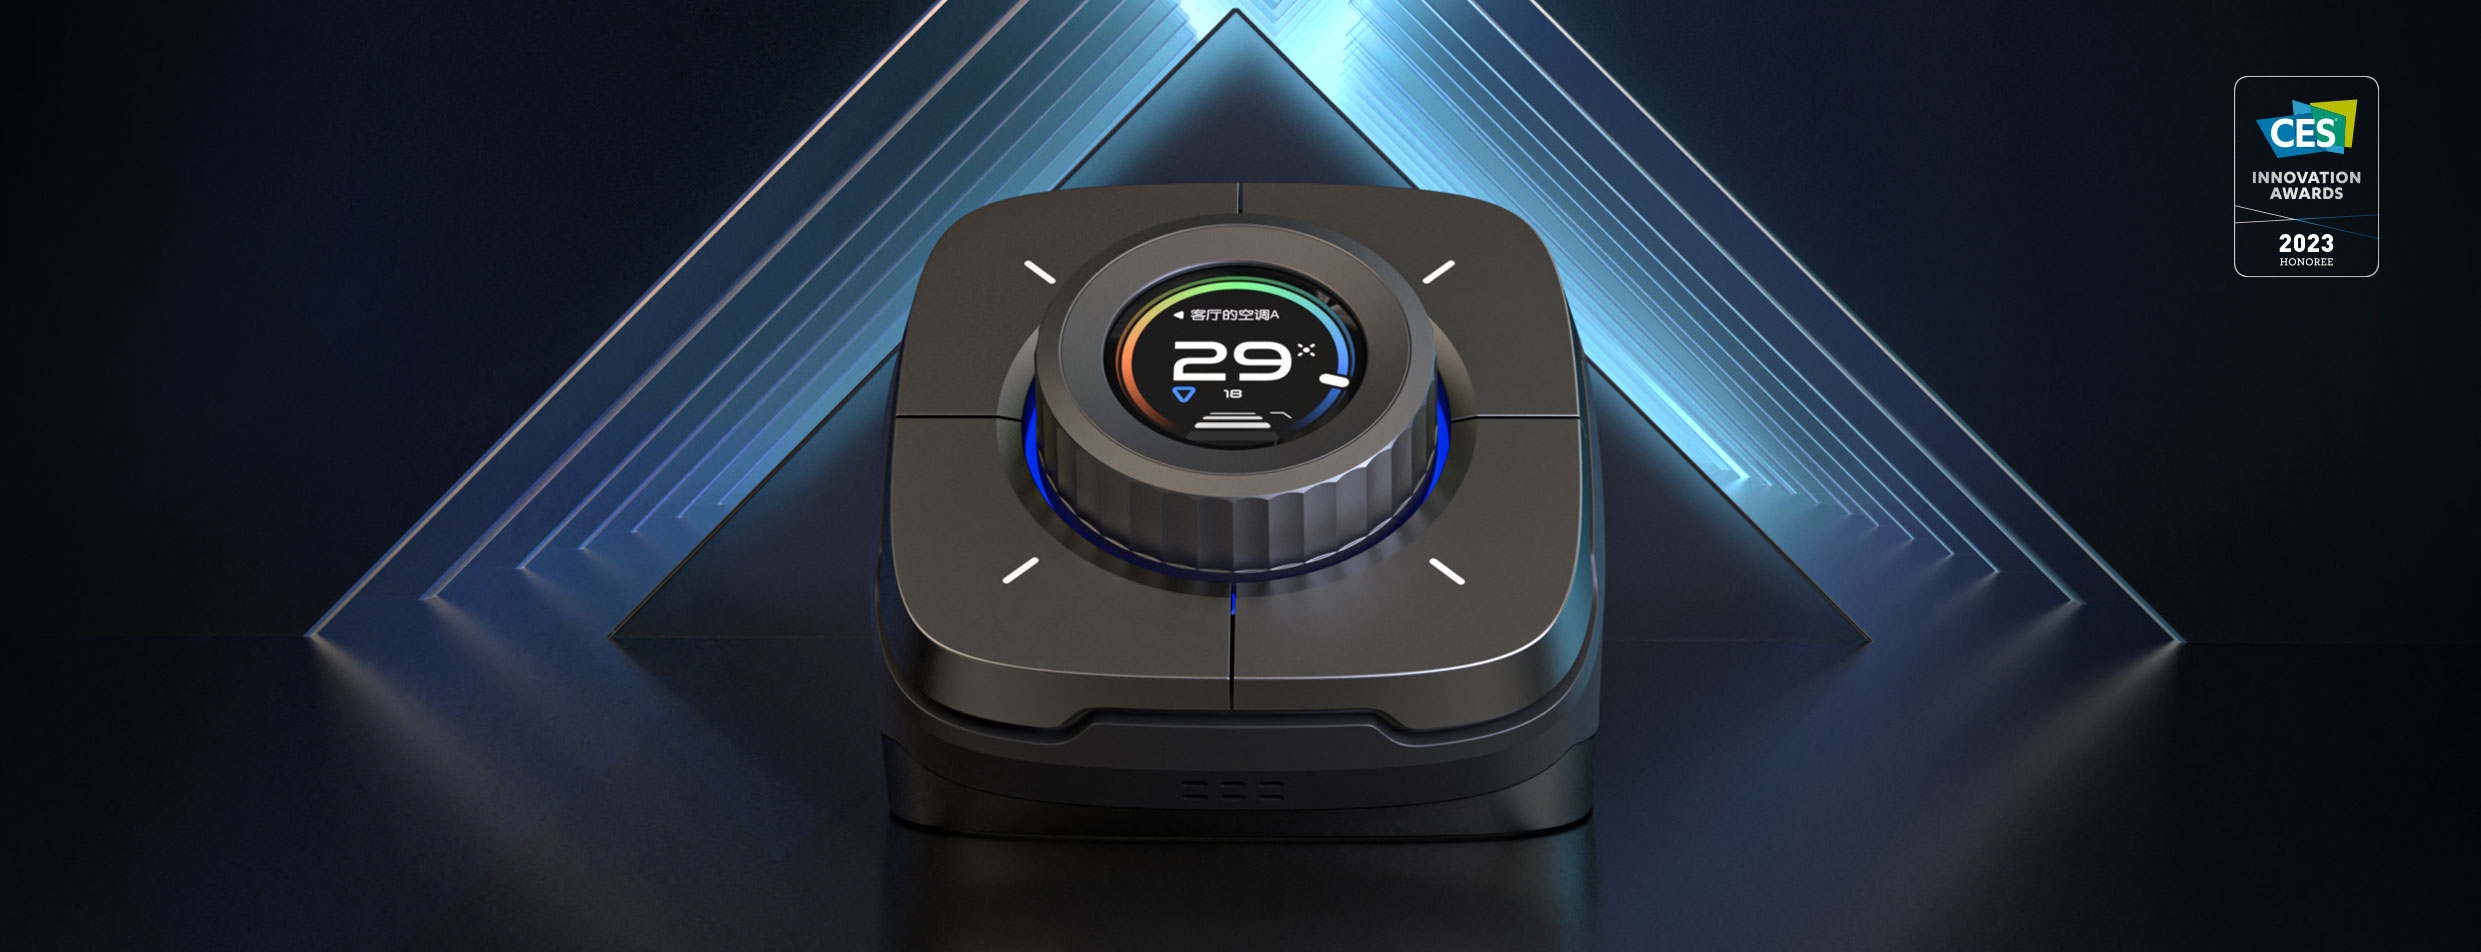 We launched Nature X, a desktop smartwatch that revolutionized the market. It was the first device of its kind to offer powerful IoT connectivity across various brands, professional air quality monitoring, and cutting-edge entertainment options. It impres